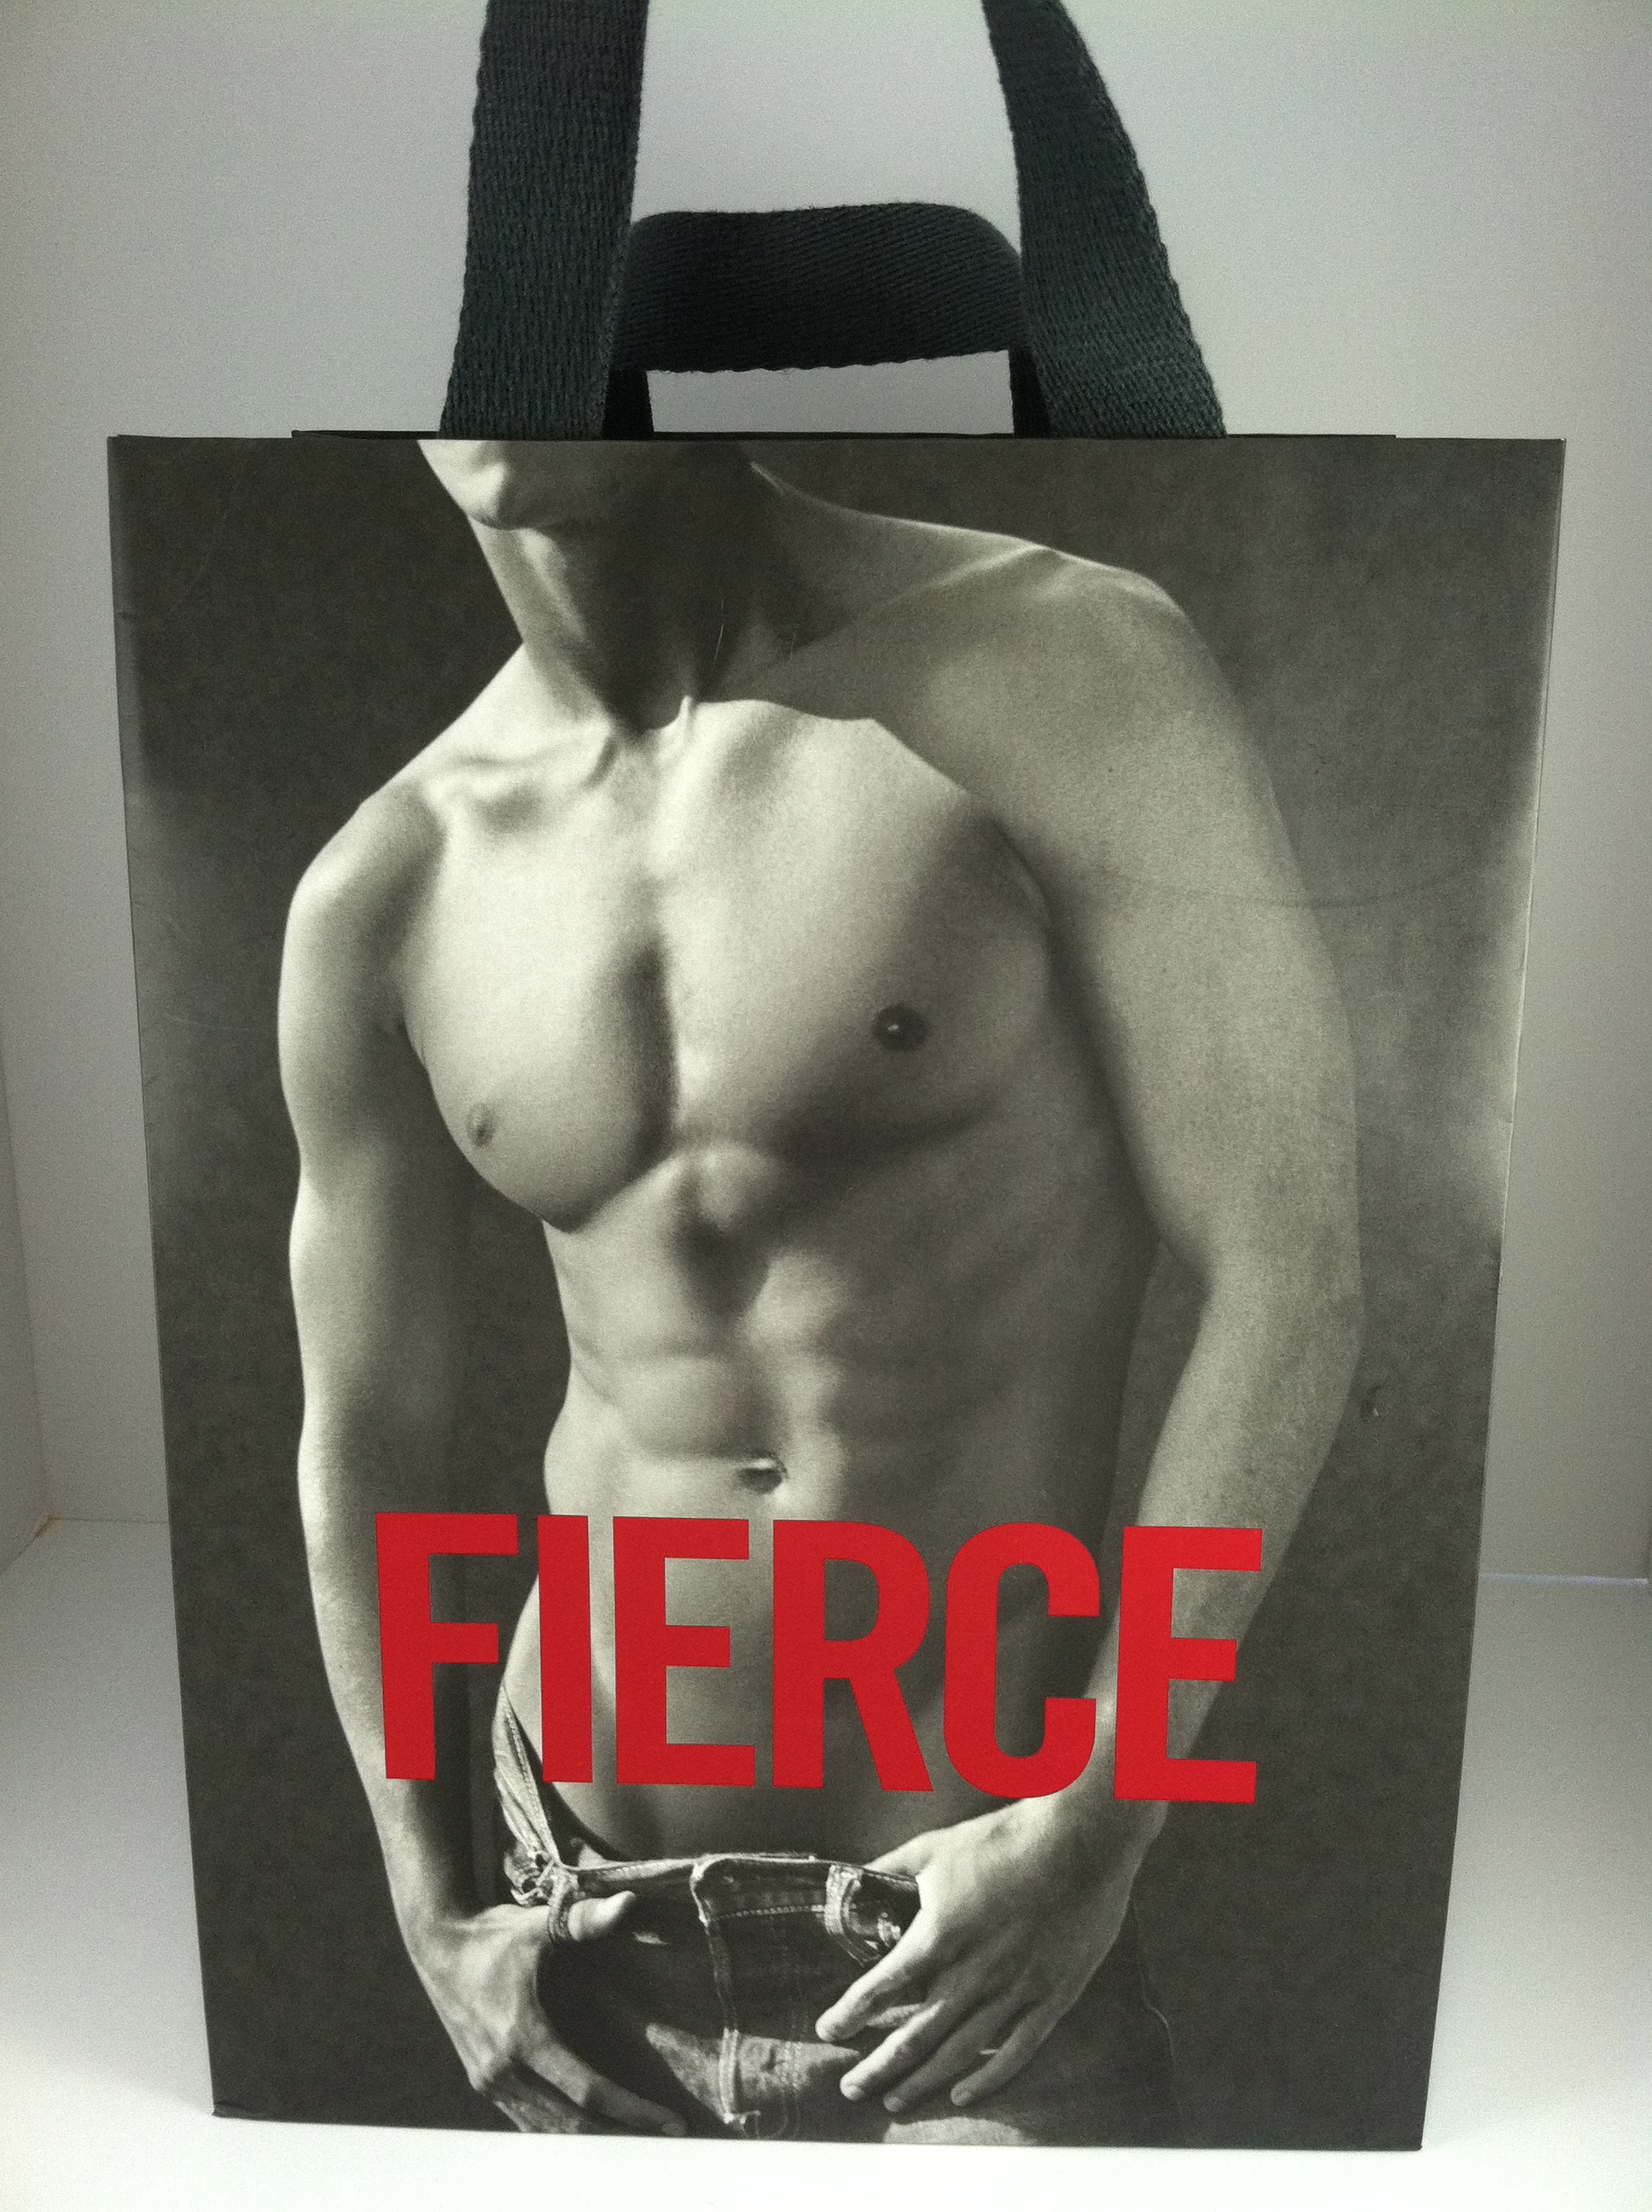 abercrombie fitch shopping bag